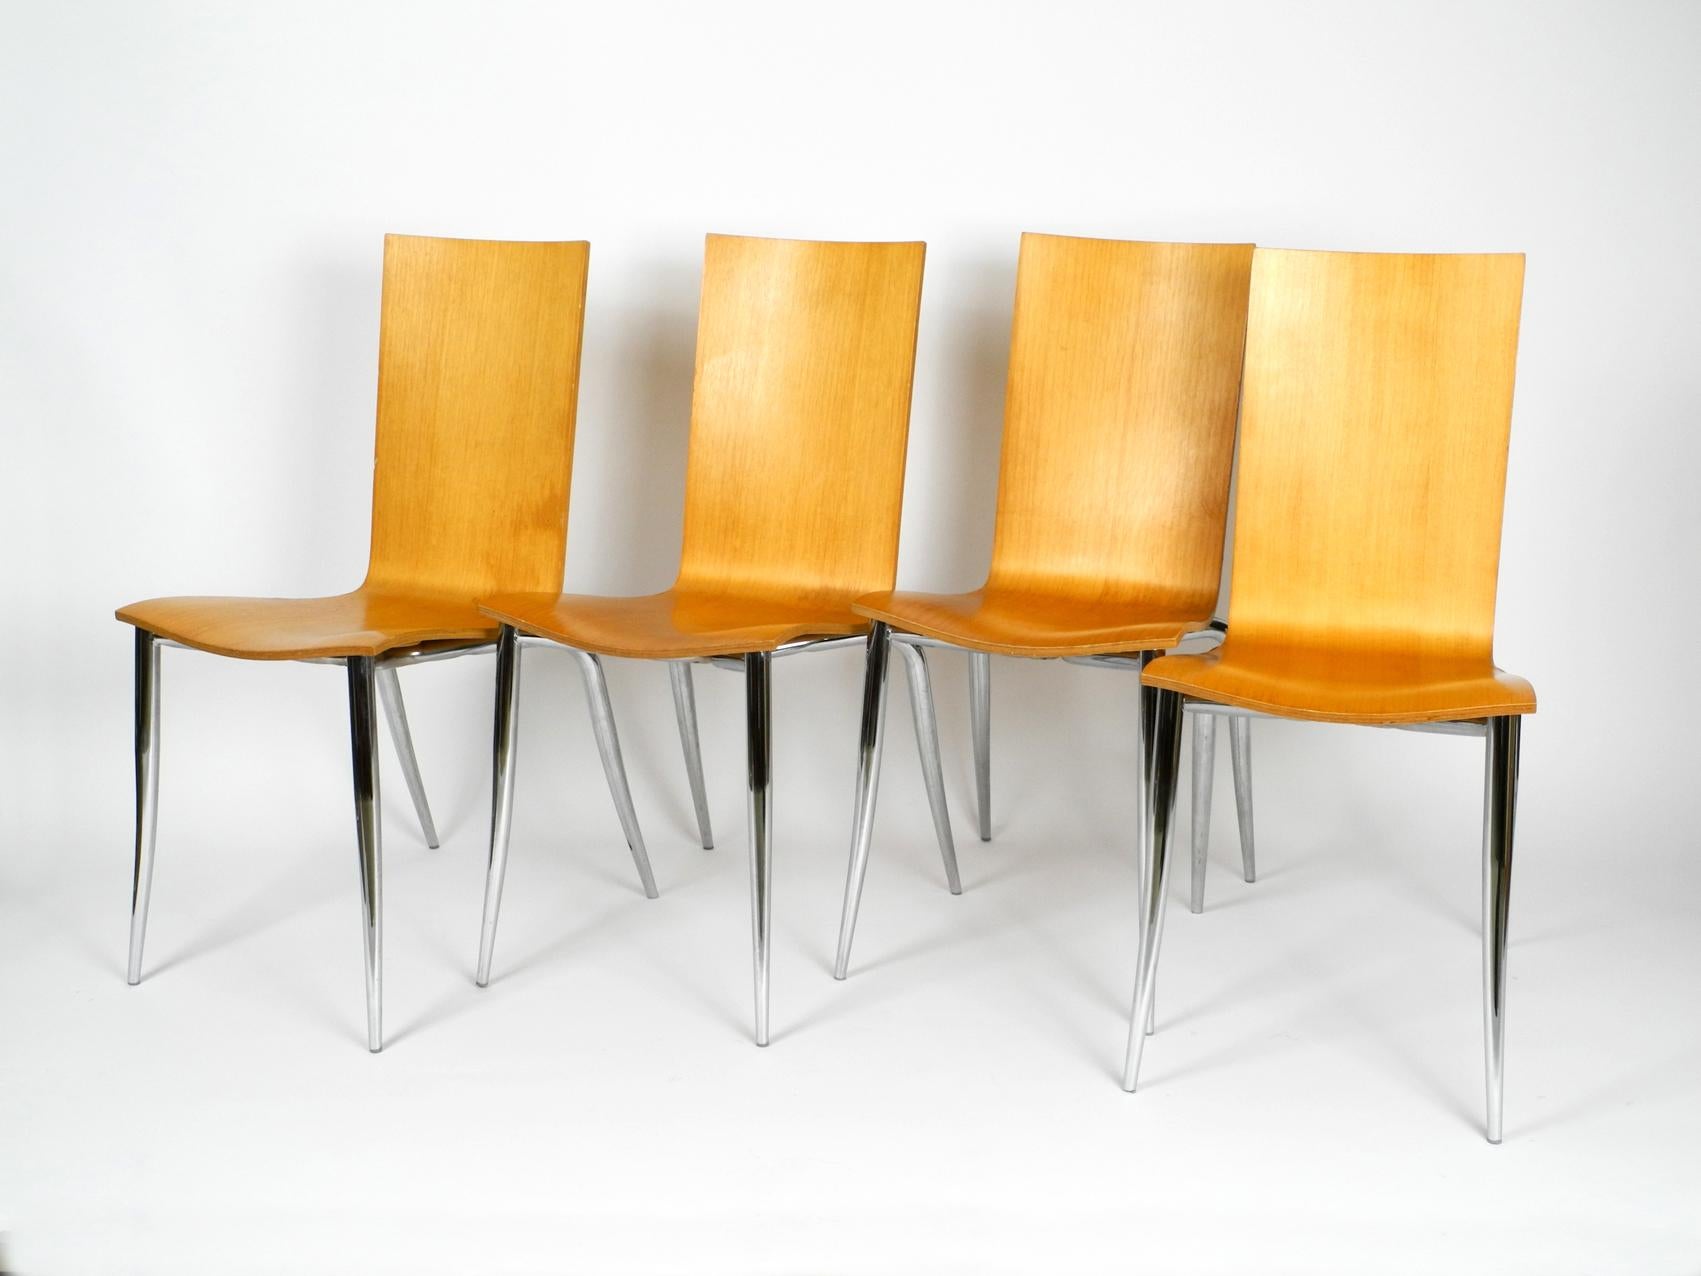 Set of 4 Olly Tango chairs from the 1990s. Design by Philippe Starck. Manufacturer Driade Aleph. Made in Italy. Elegant minimalist postmodern design. Seat made of thick molded plywood. Organically shaped metal legs chromed.
Massively built and very